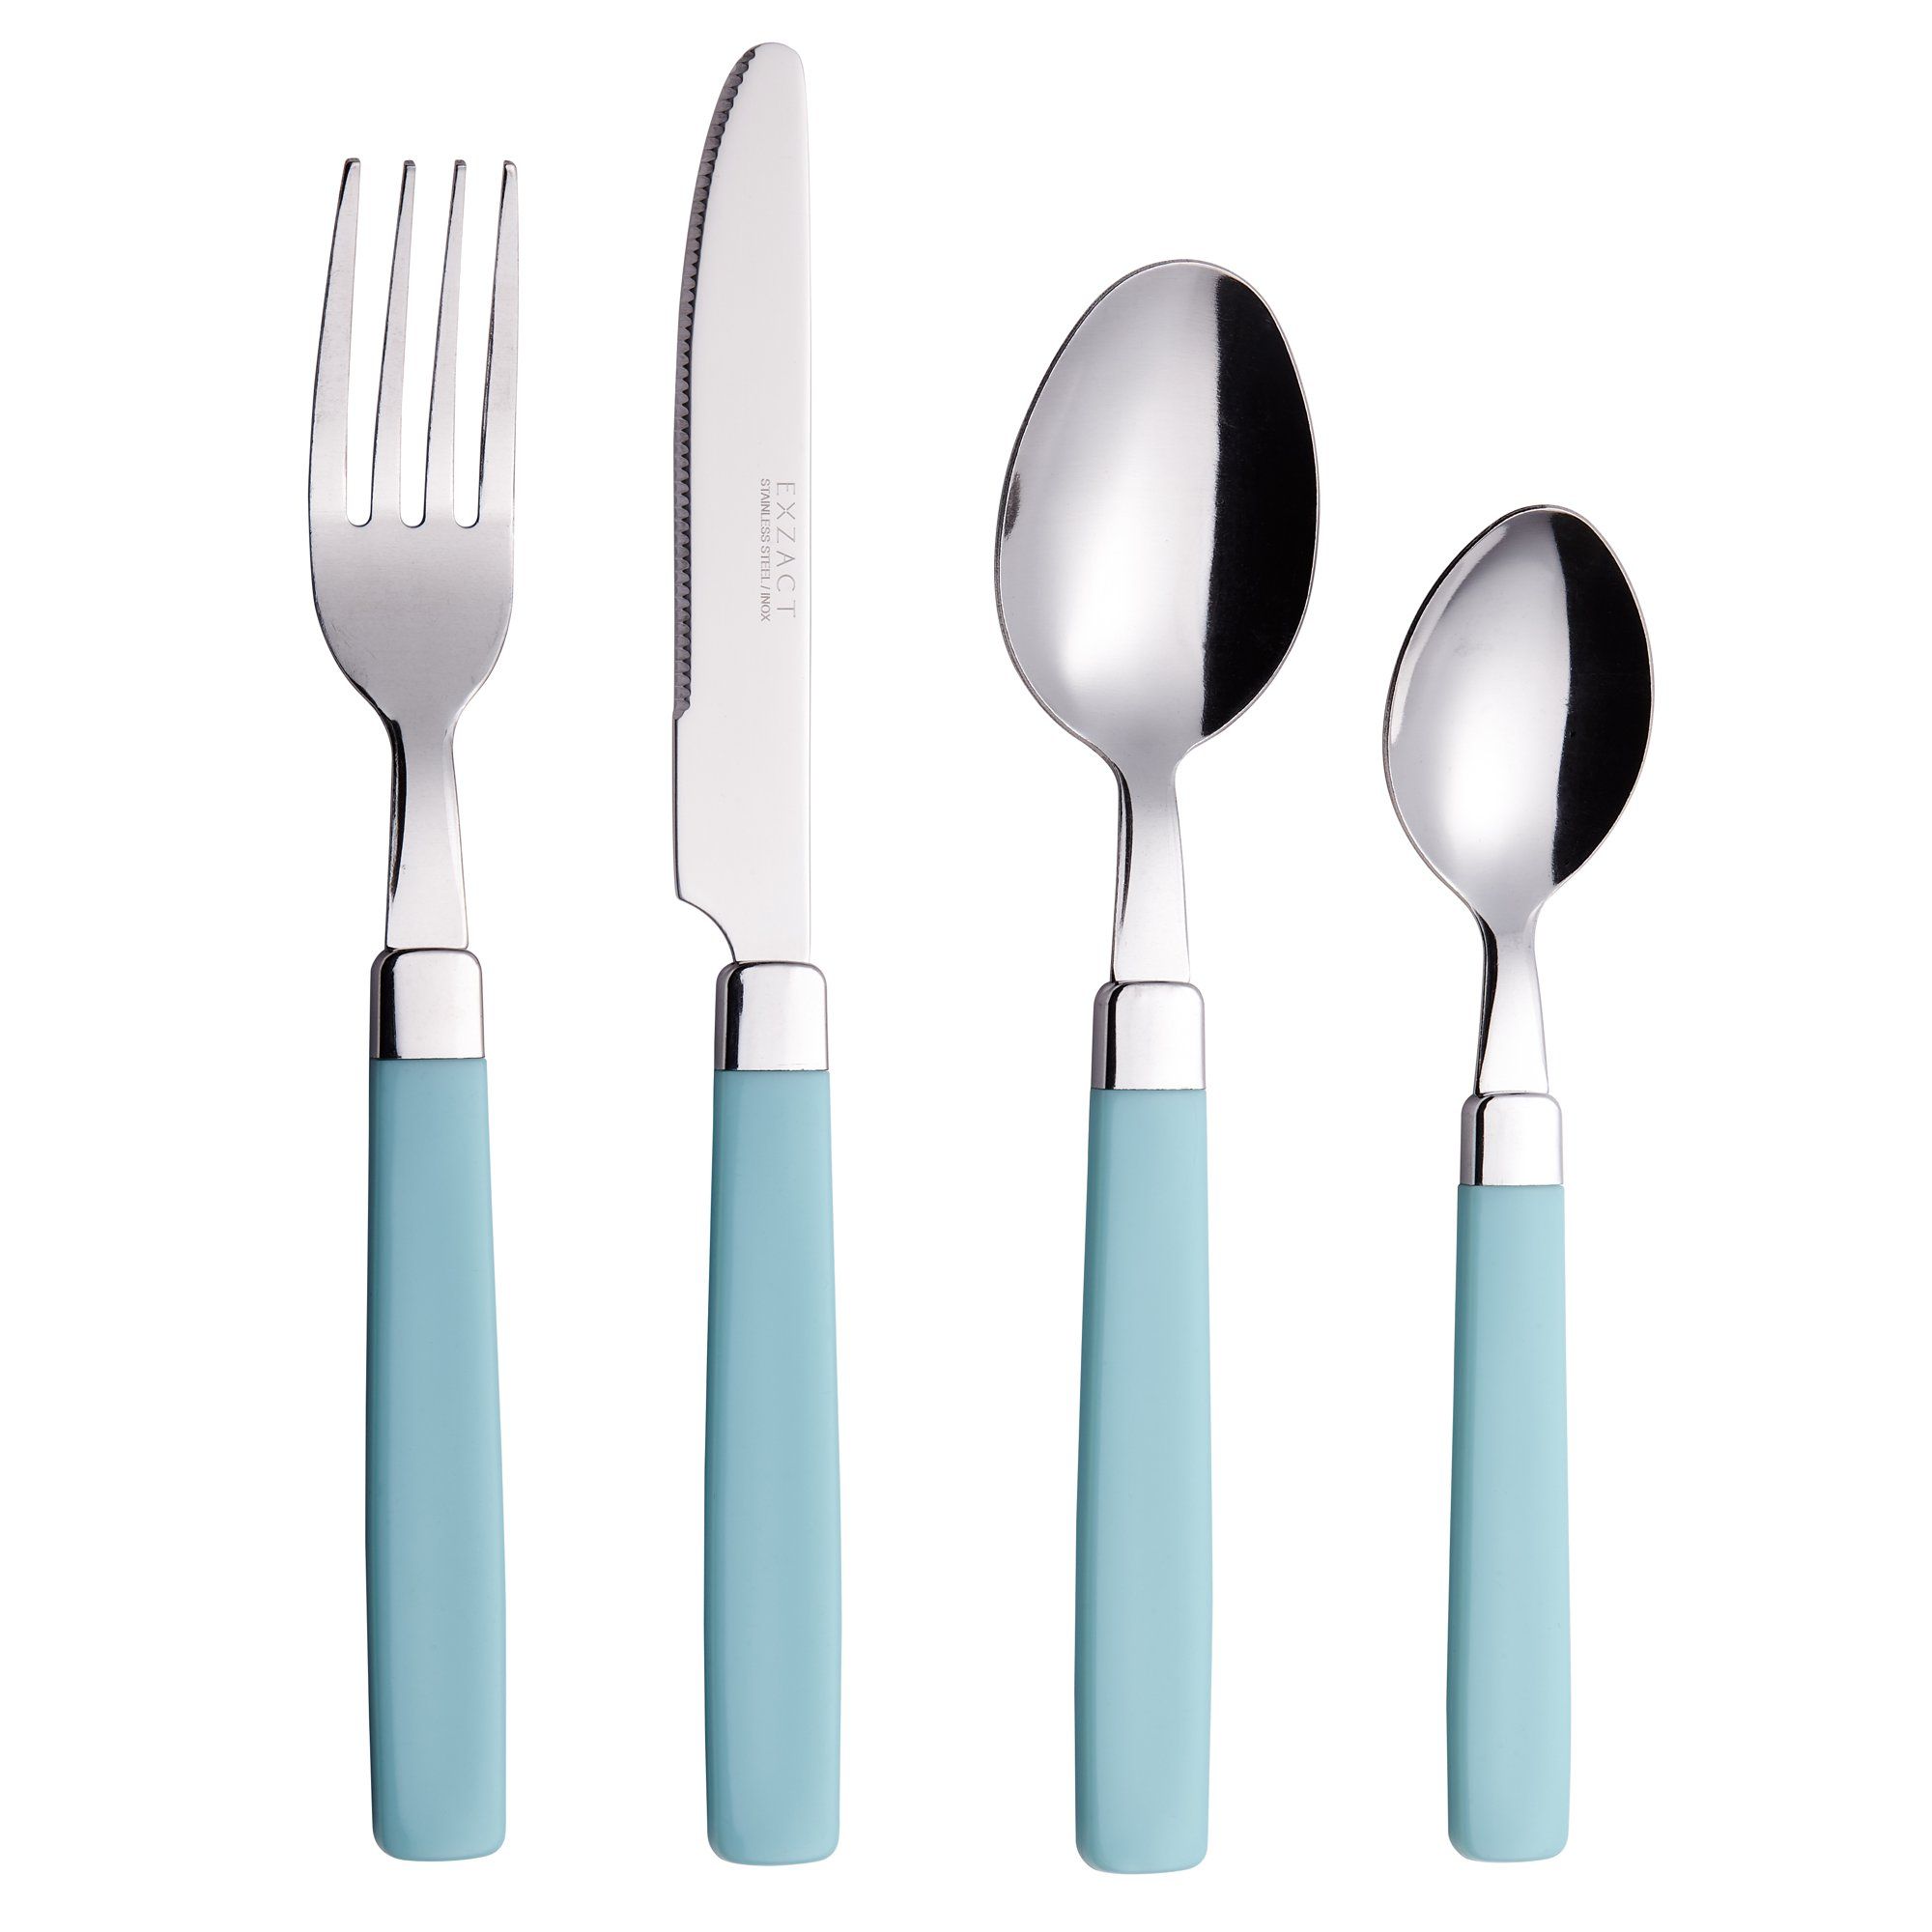 ANNOVA 16 PCS Stainless Steel Silverware/Flatware Set With Colored Handles - Turquoise | Walmart (US)